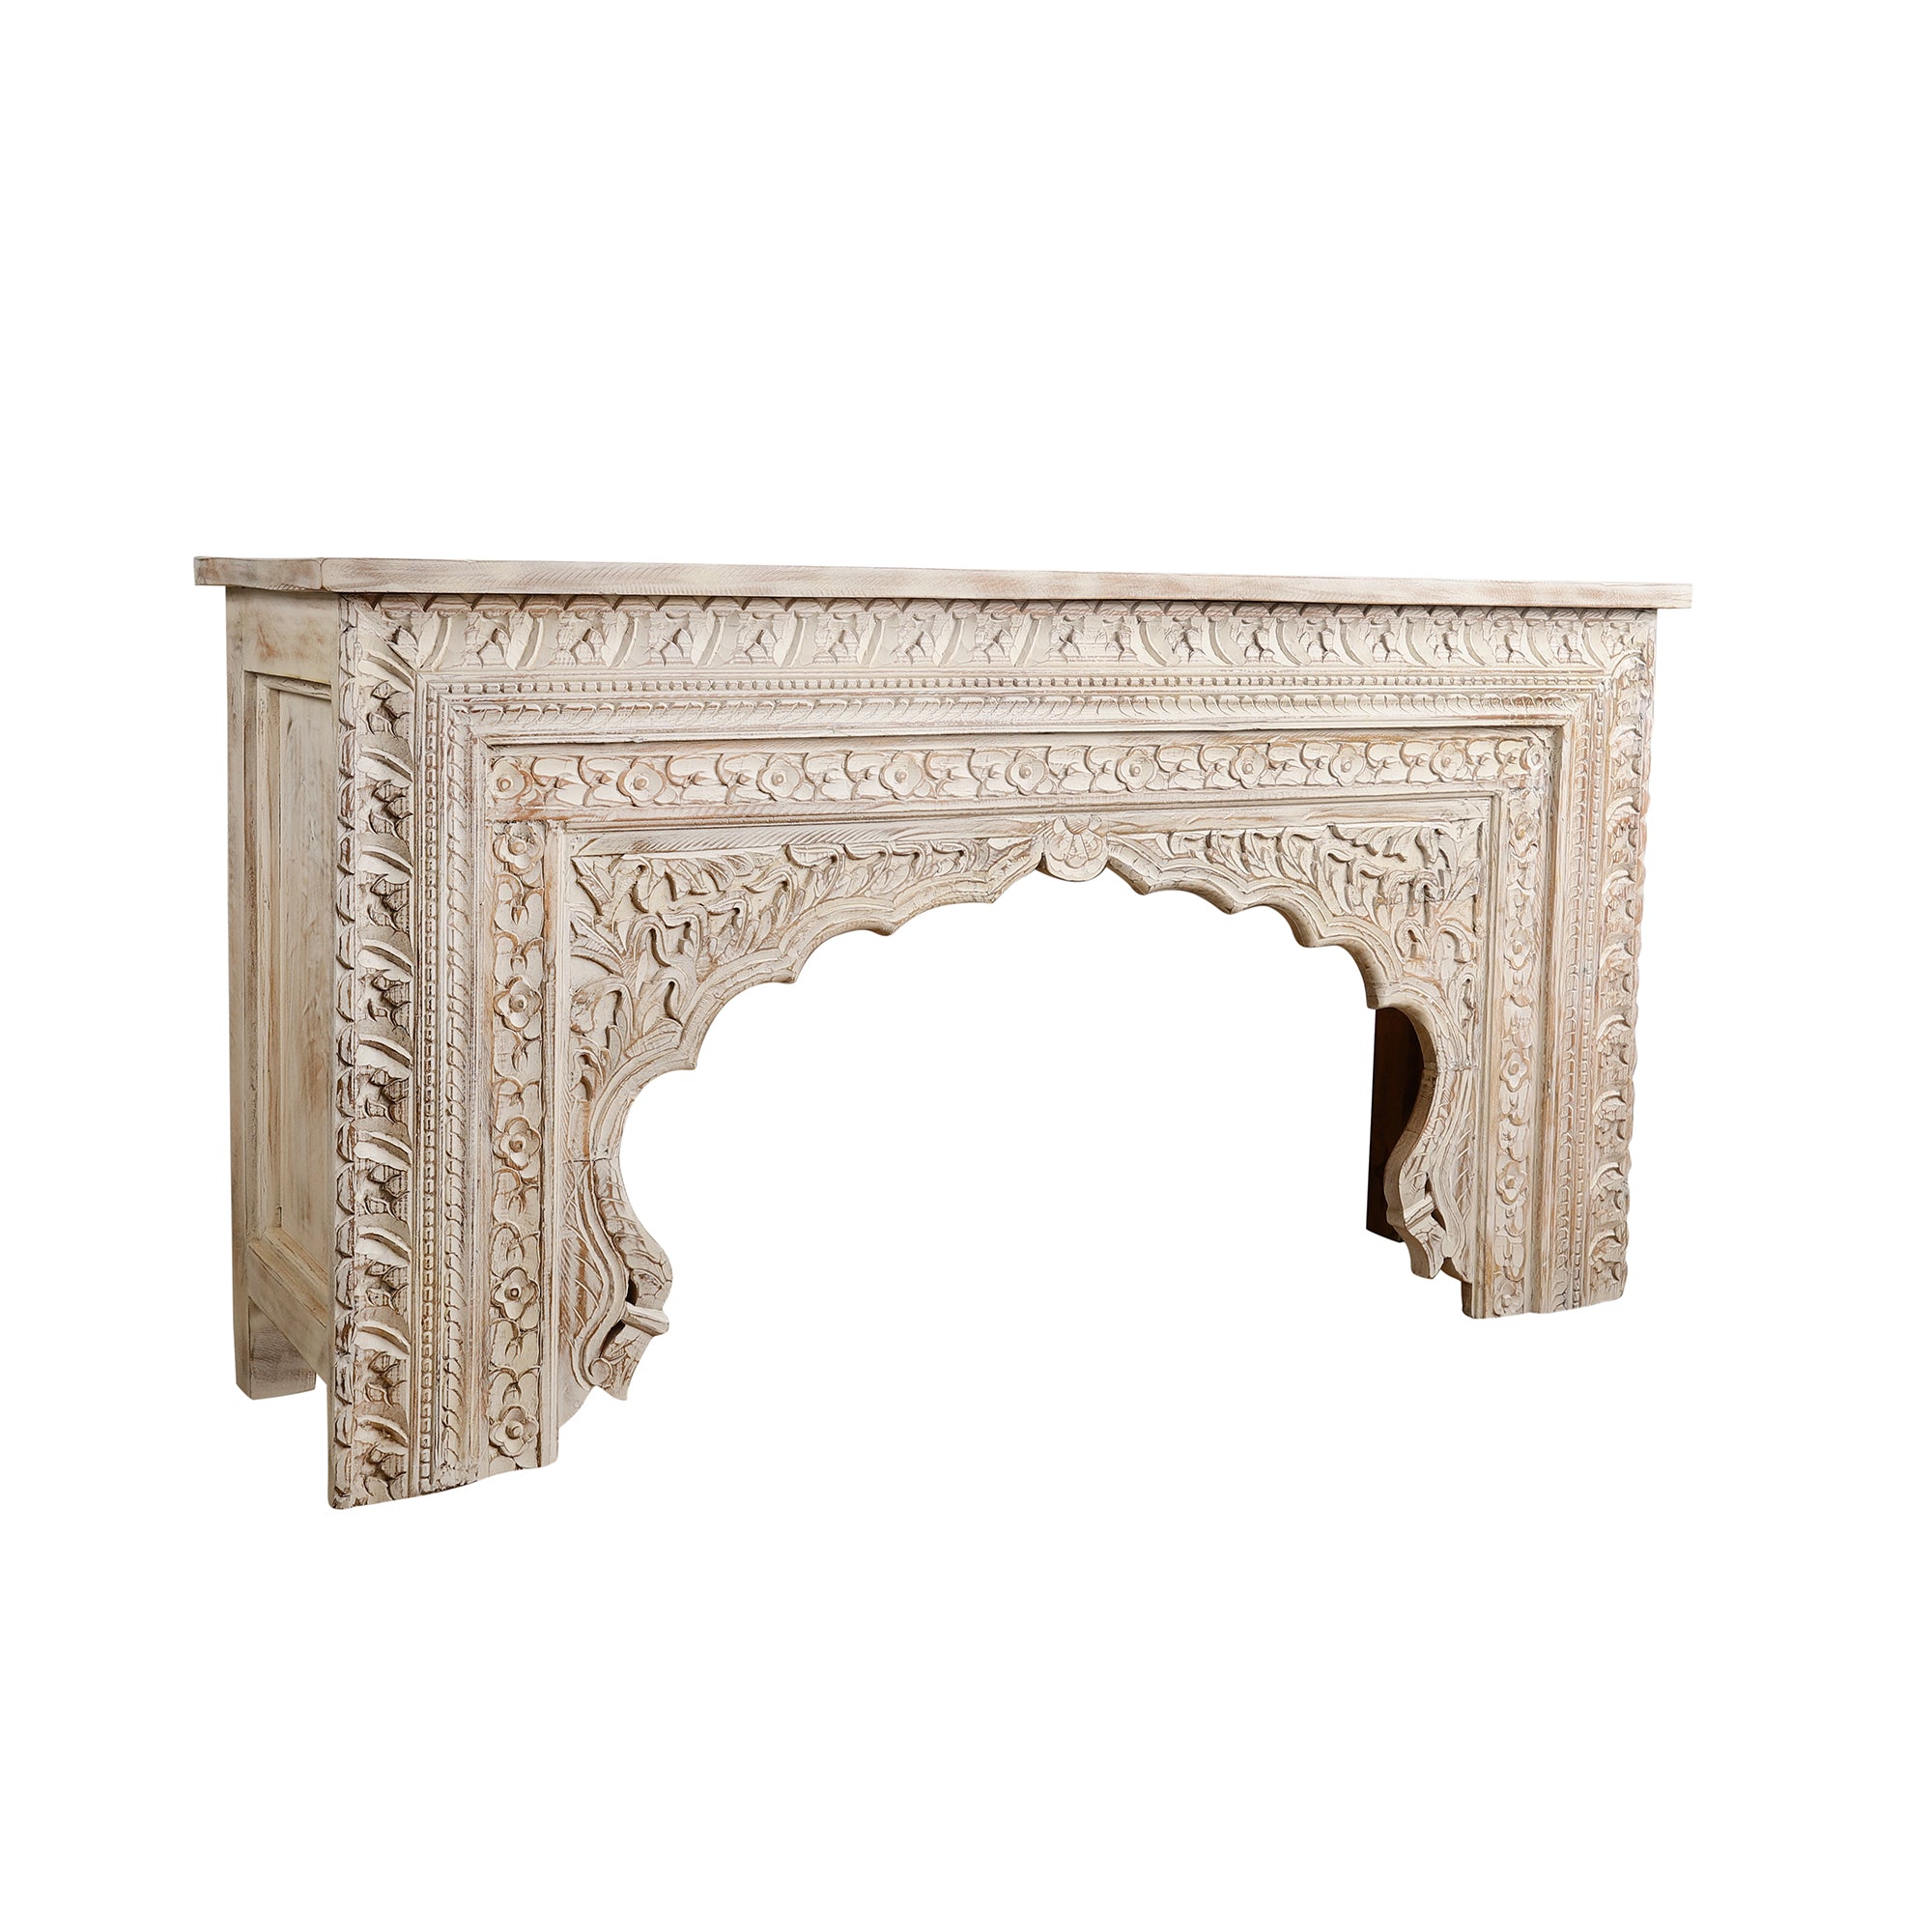 Mehraab Handcrafted Console Table